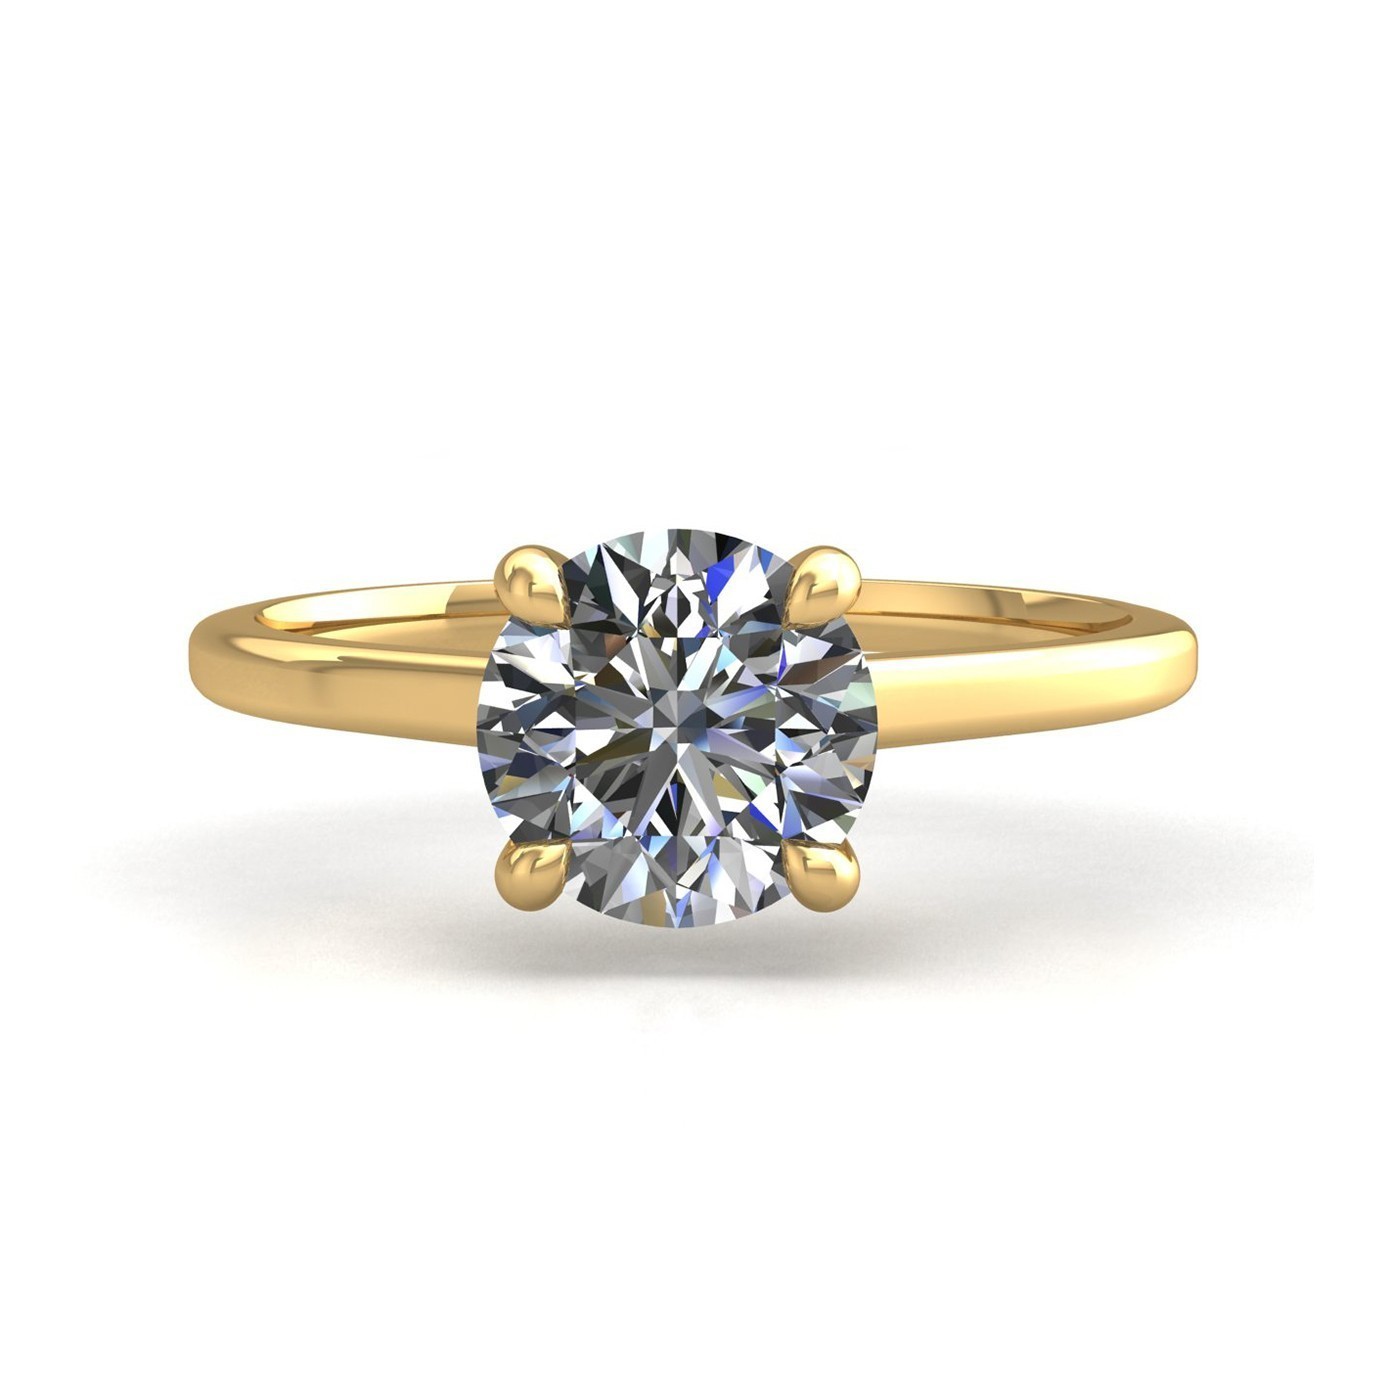 18K YELLOW GOLD 4 PRONGS SOLITAIRE ROUND CUT DIAMOND ENGAGEMENT RING WITH WHISPER THIN BAND